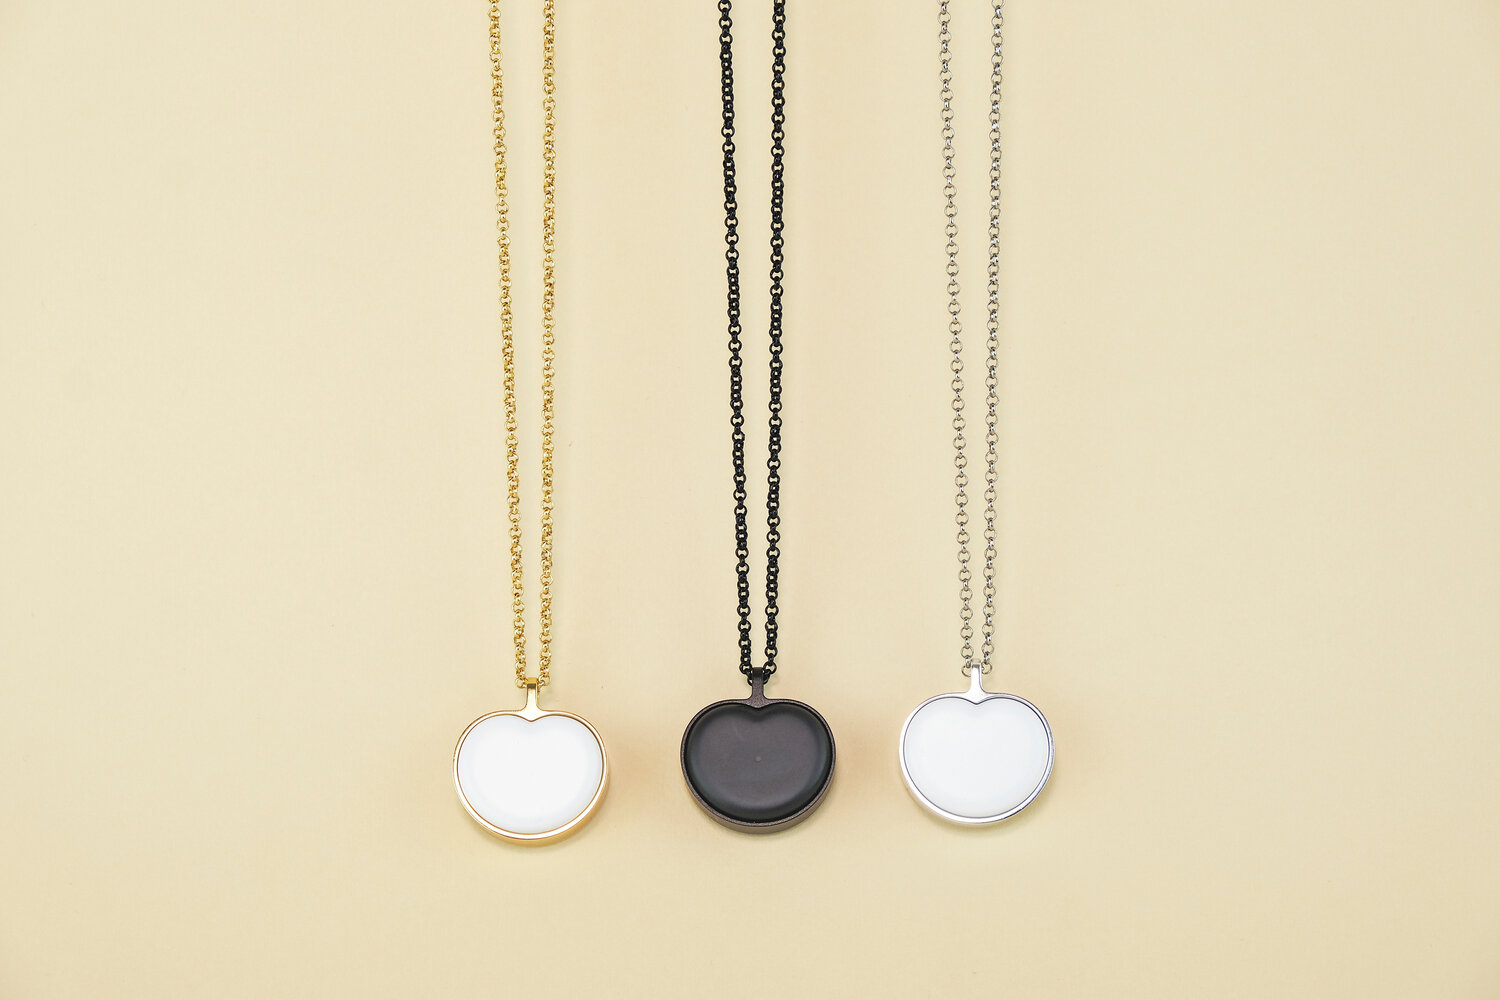 Bond Heart smart necklace, which stores and plays heartbeats with the help of an app.